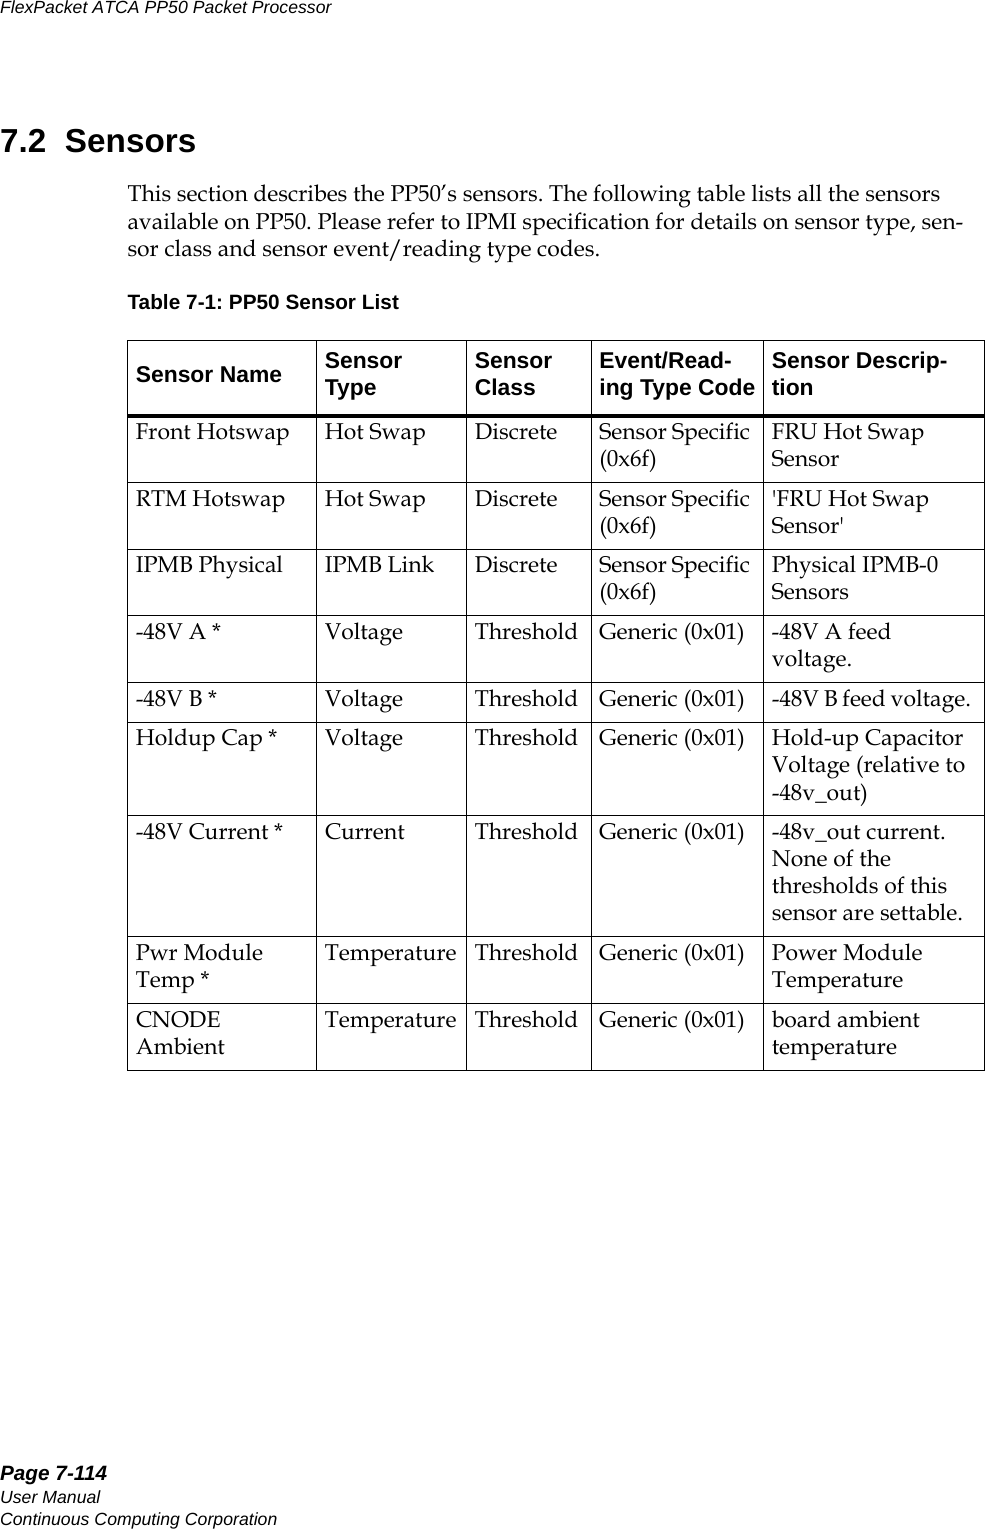 Page 7-114User ManualContinuous Computing CorporationFlexPacket ATCA PP50 Packet Processor     Preliminary7.2  SensorsThis section describes the PP50’s sensors. The following table lists all the sensors available on PP50. Please refer to IPMI specification for details on sensor type, sen-sor class and sensor event/reading type codes.Table 7-1: PP50 Sensor ListSensor Name Sensor Type Sensor Class Event/Read-ing Type Code Sensor Descrip-tionFront Hotswap Hot Swap Discrete Sensor Specific (0x6f)FRU Hot Swap SensorRTM Hotswap Hot Swap Discrete Sensor Specific (0x6f)&apos;FRU Hot Swap Sensor&apos;IPMB Physical IPMB Link Discrete Sensor Specific (0x6f)Physical IPMB-0 Sensors-48V A * Voltage Threshold Generic (0x01) -48V A feed voltage. -48V B * Voltage Threshold Generic (0x01) -48V B feed voltage. Holdup Cap * Voltage Threshold Generic (0x01) Hold-up Capacitor Voltage (relative to -48v_out)-48V Current * Current Threshold Generic (0x01) -48v_out current. None of the thresholds of this sensor are settable.Pwr Module Temp *Temperature Threshold Generic (0x01) Power Module TemperatureCNODE AmbientTemperature Threshold Generic (0x01) board ambient temperature 